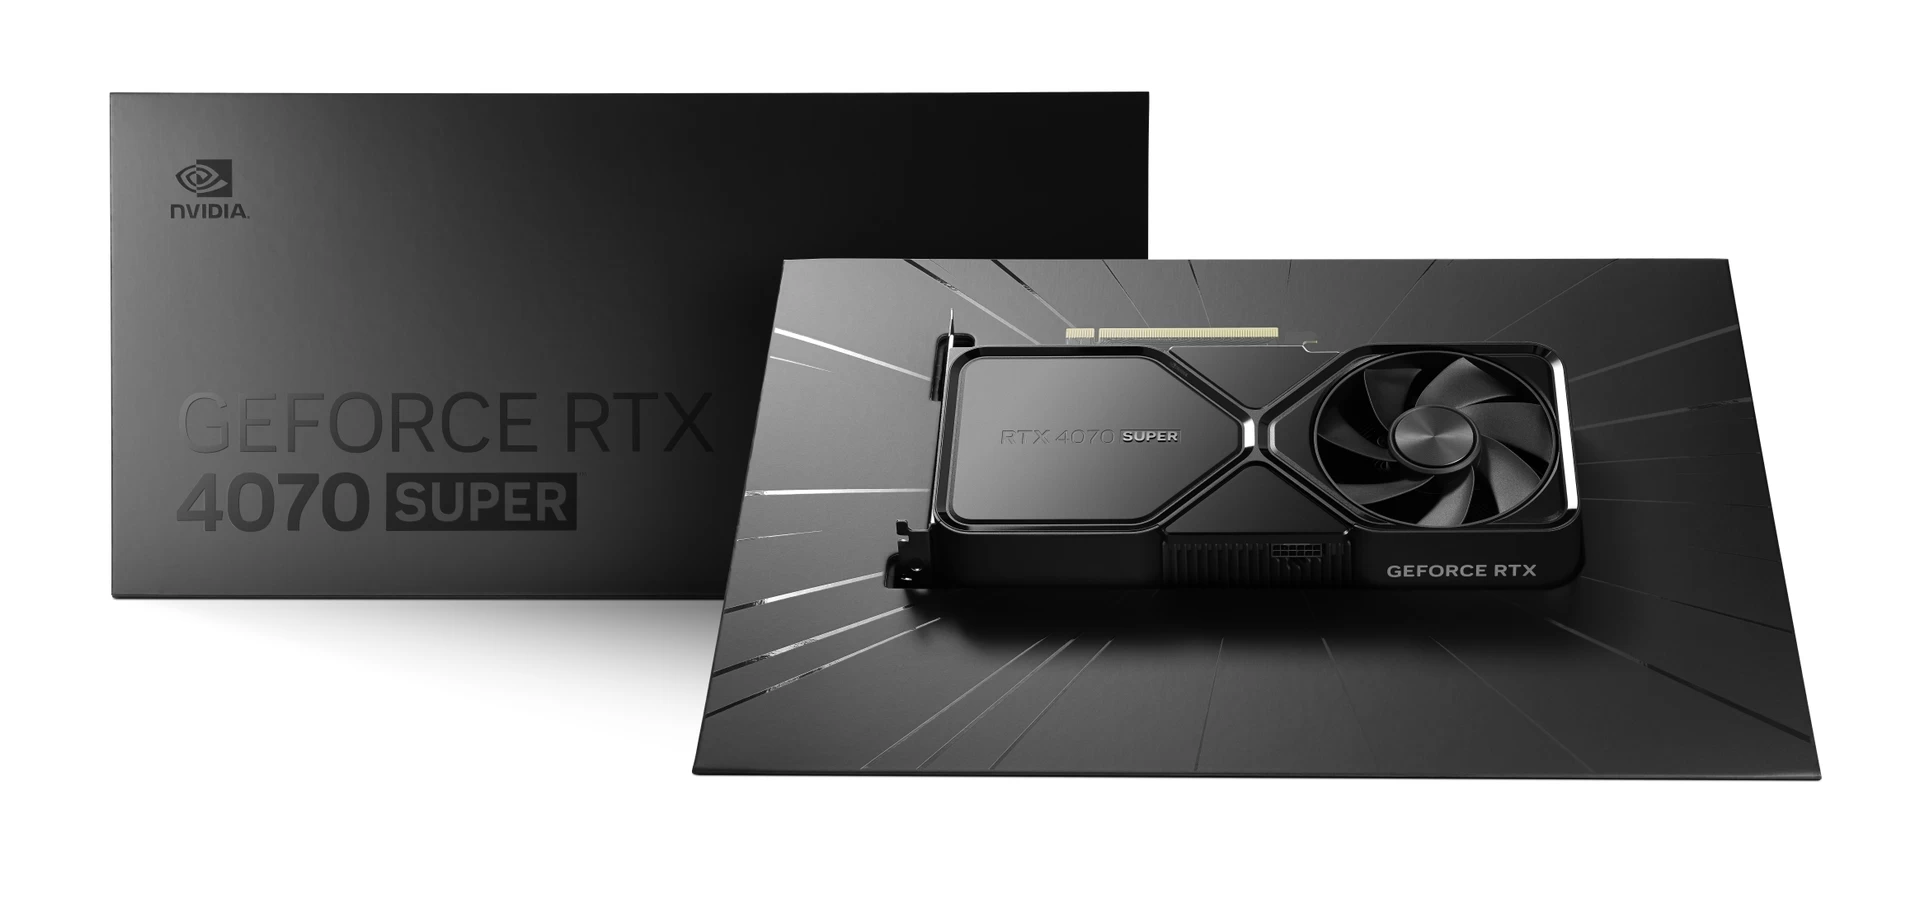 Nvidia GeForce RTX 4070 Super Founders Edition Package